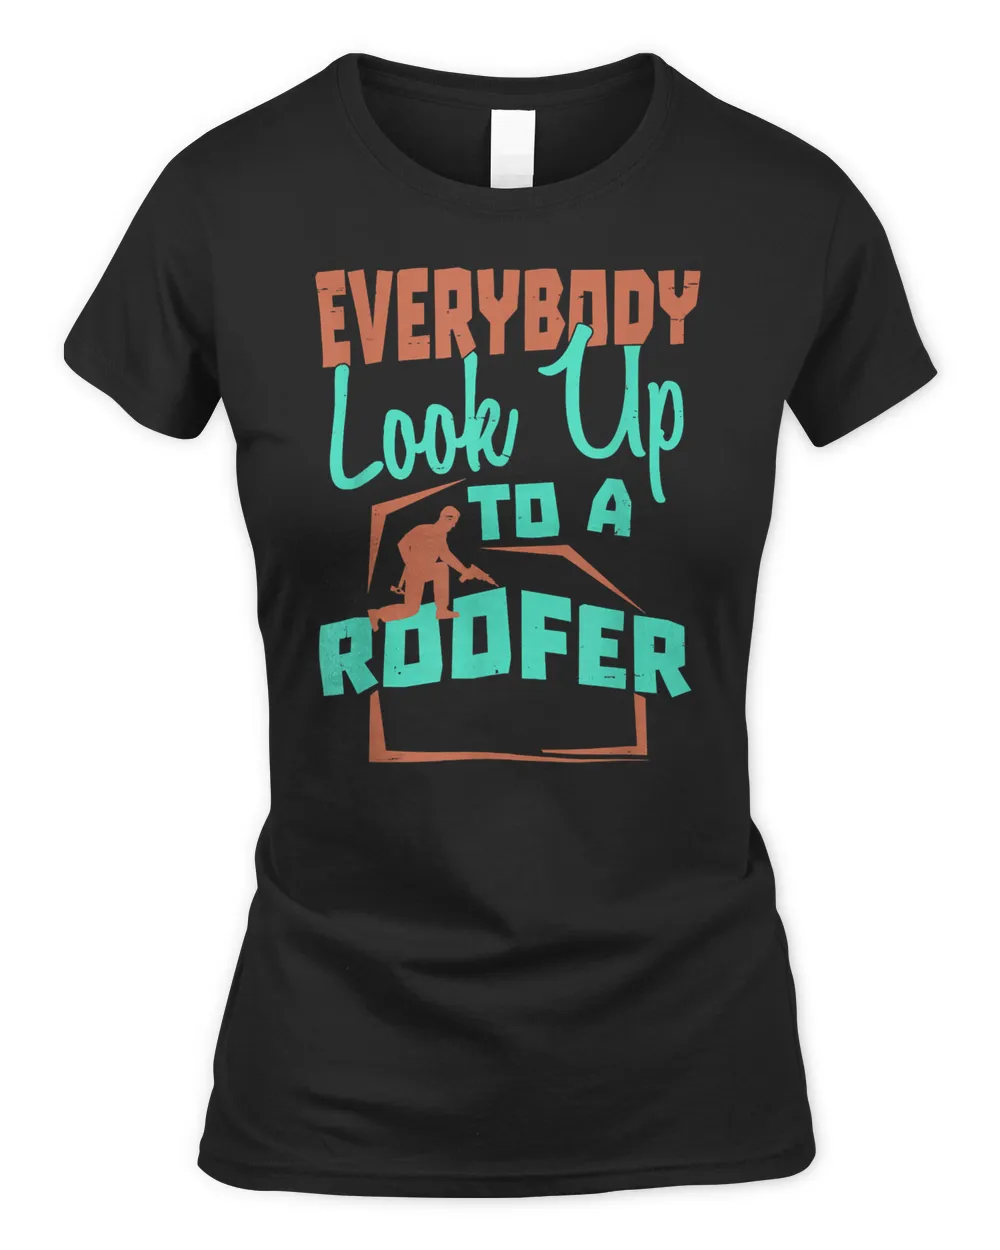 Roofer Shirts Men - Everybody Look Up To A Roofer T-Shirt